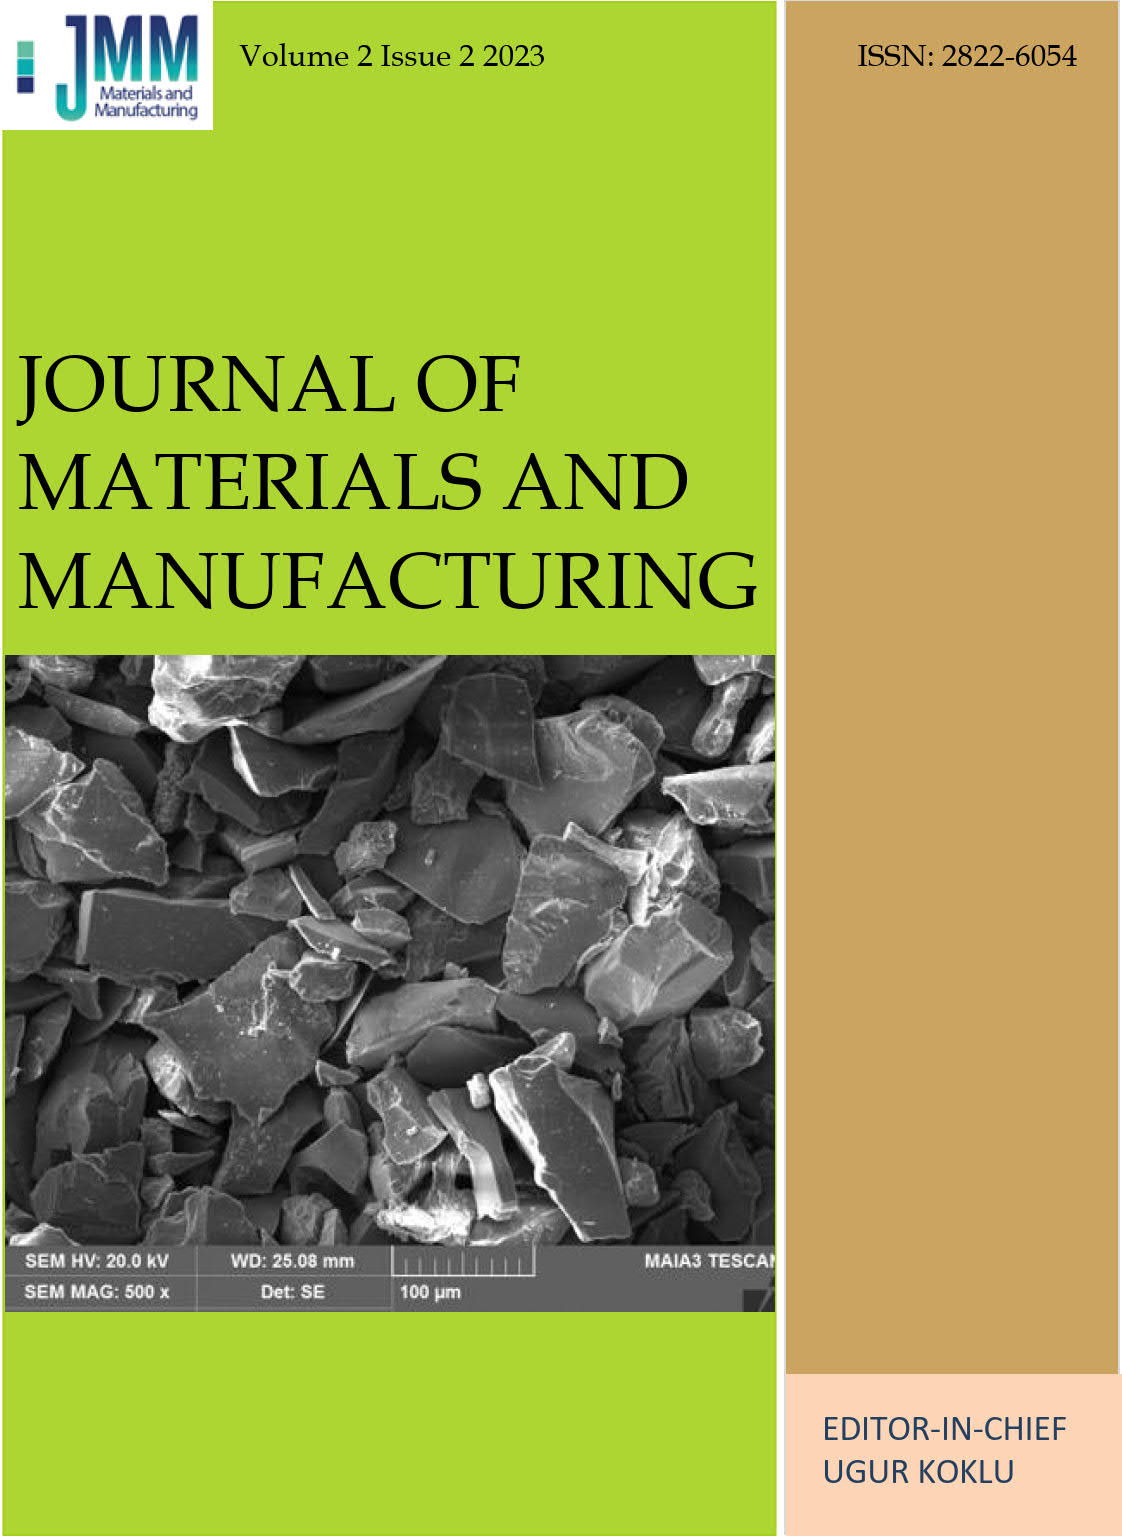 					View Vol. 2 No. 2 (2023): Journal of Materials and Manufacturing
				